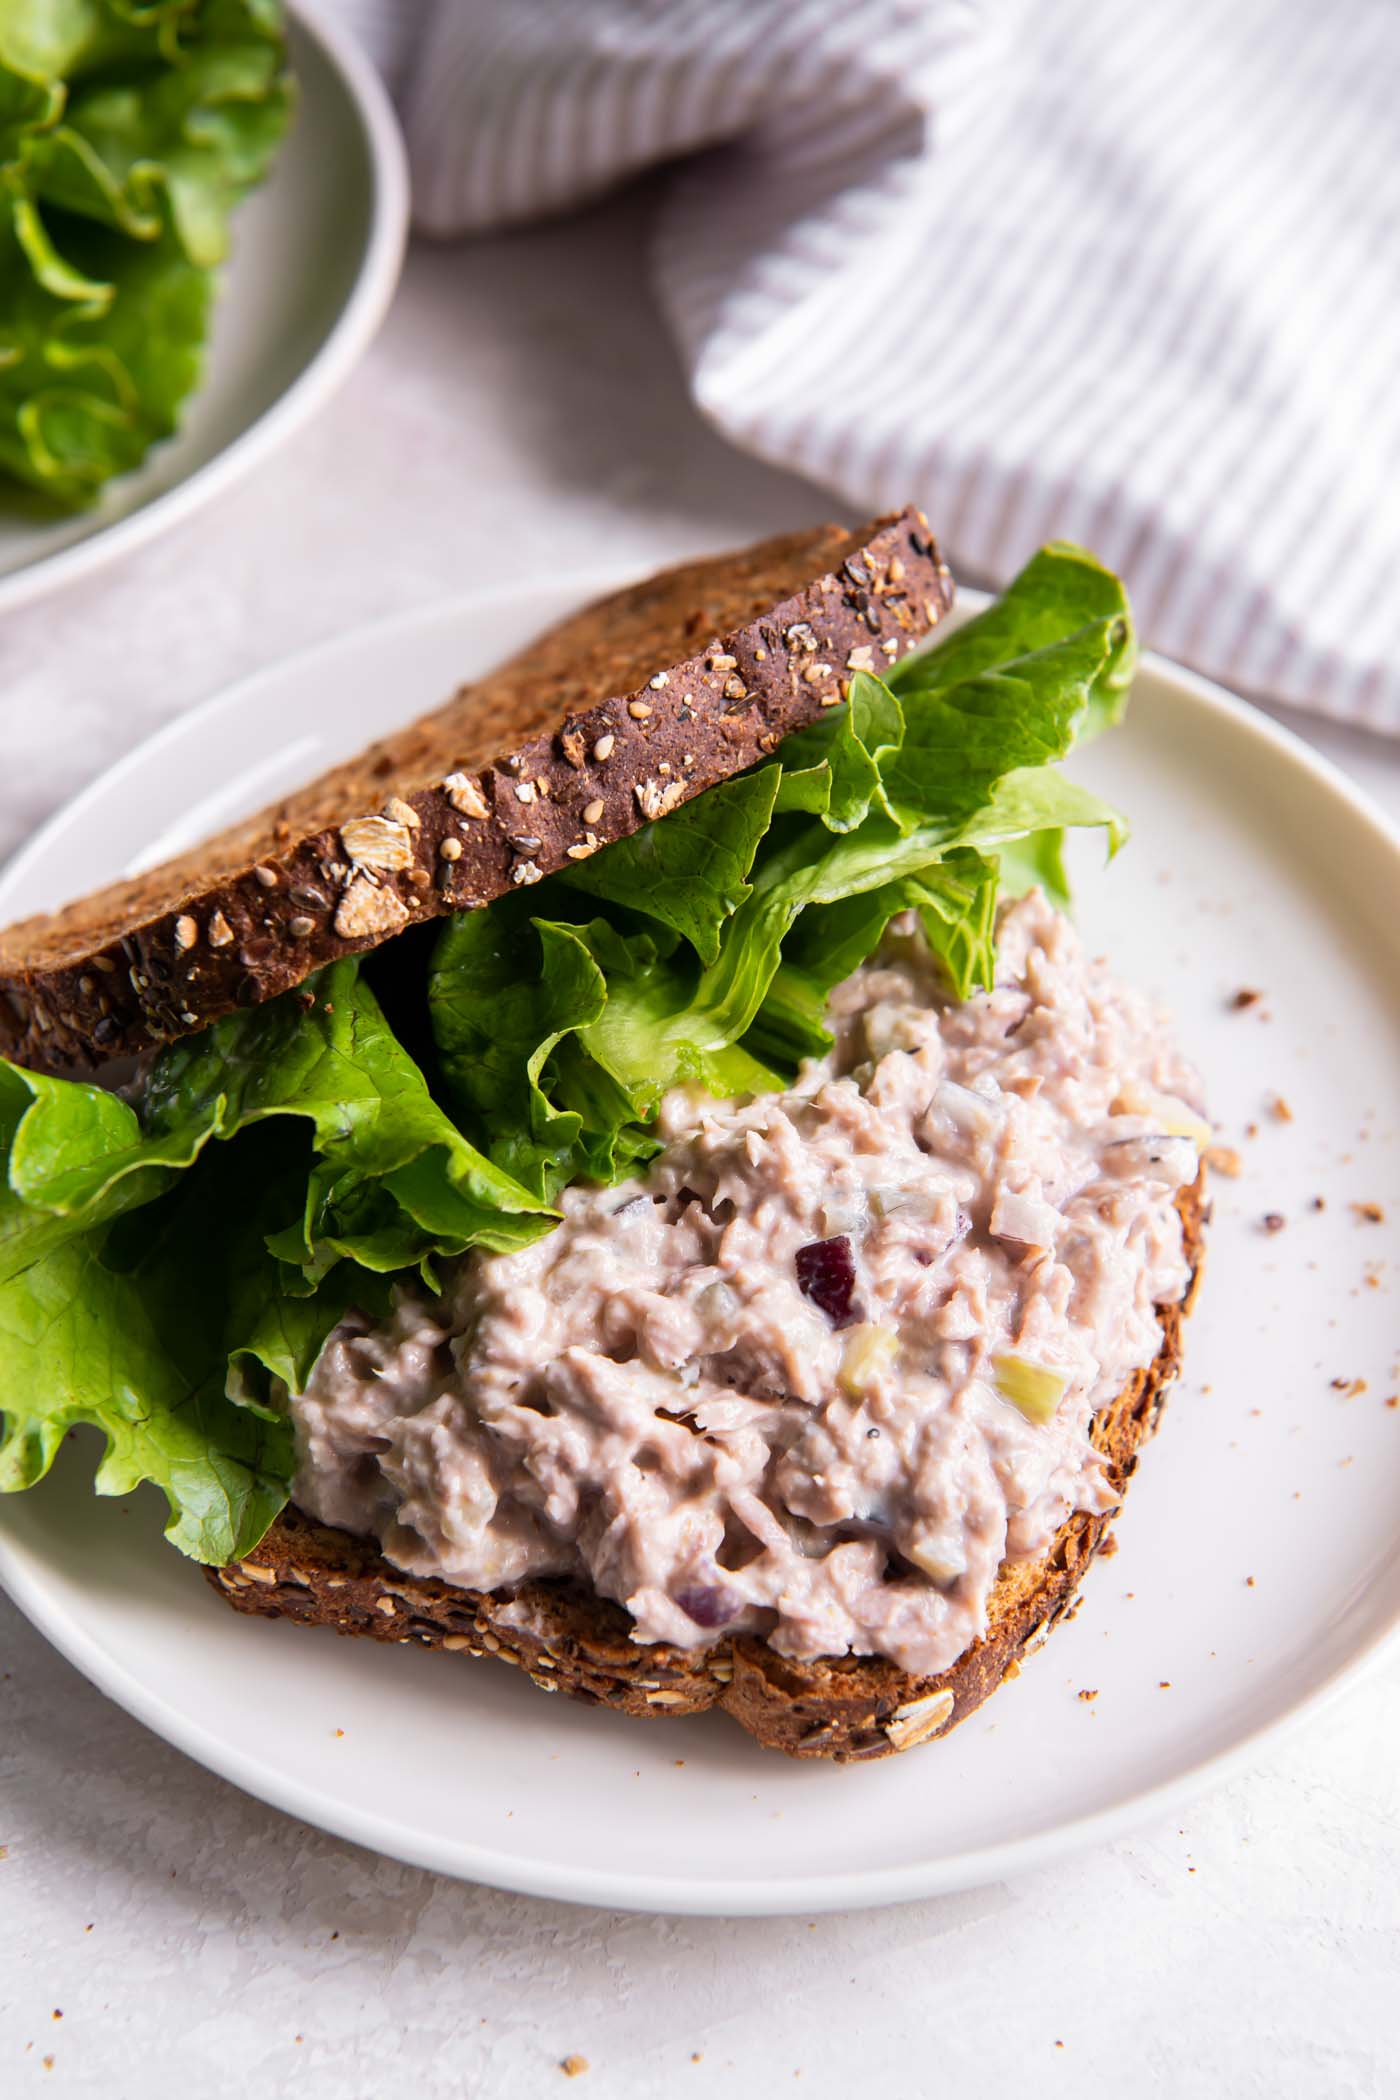 Tuna salad served in a sandwich made with toasted whole grain bread and lettuce.